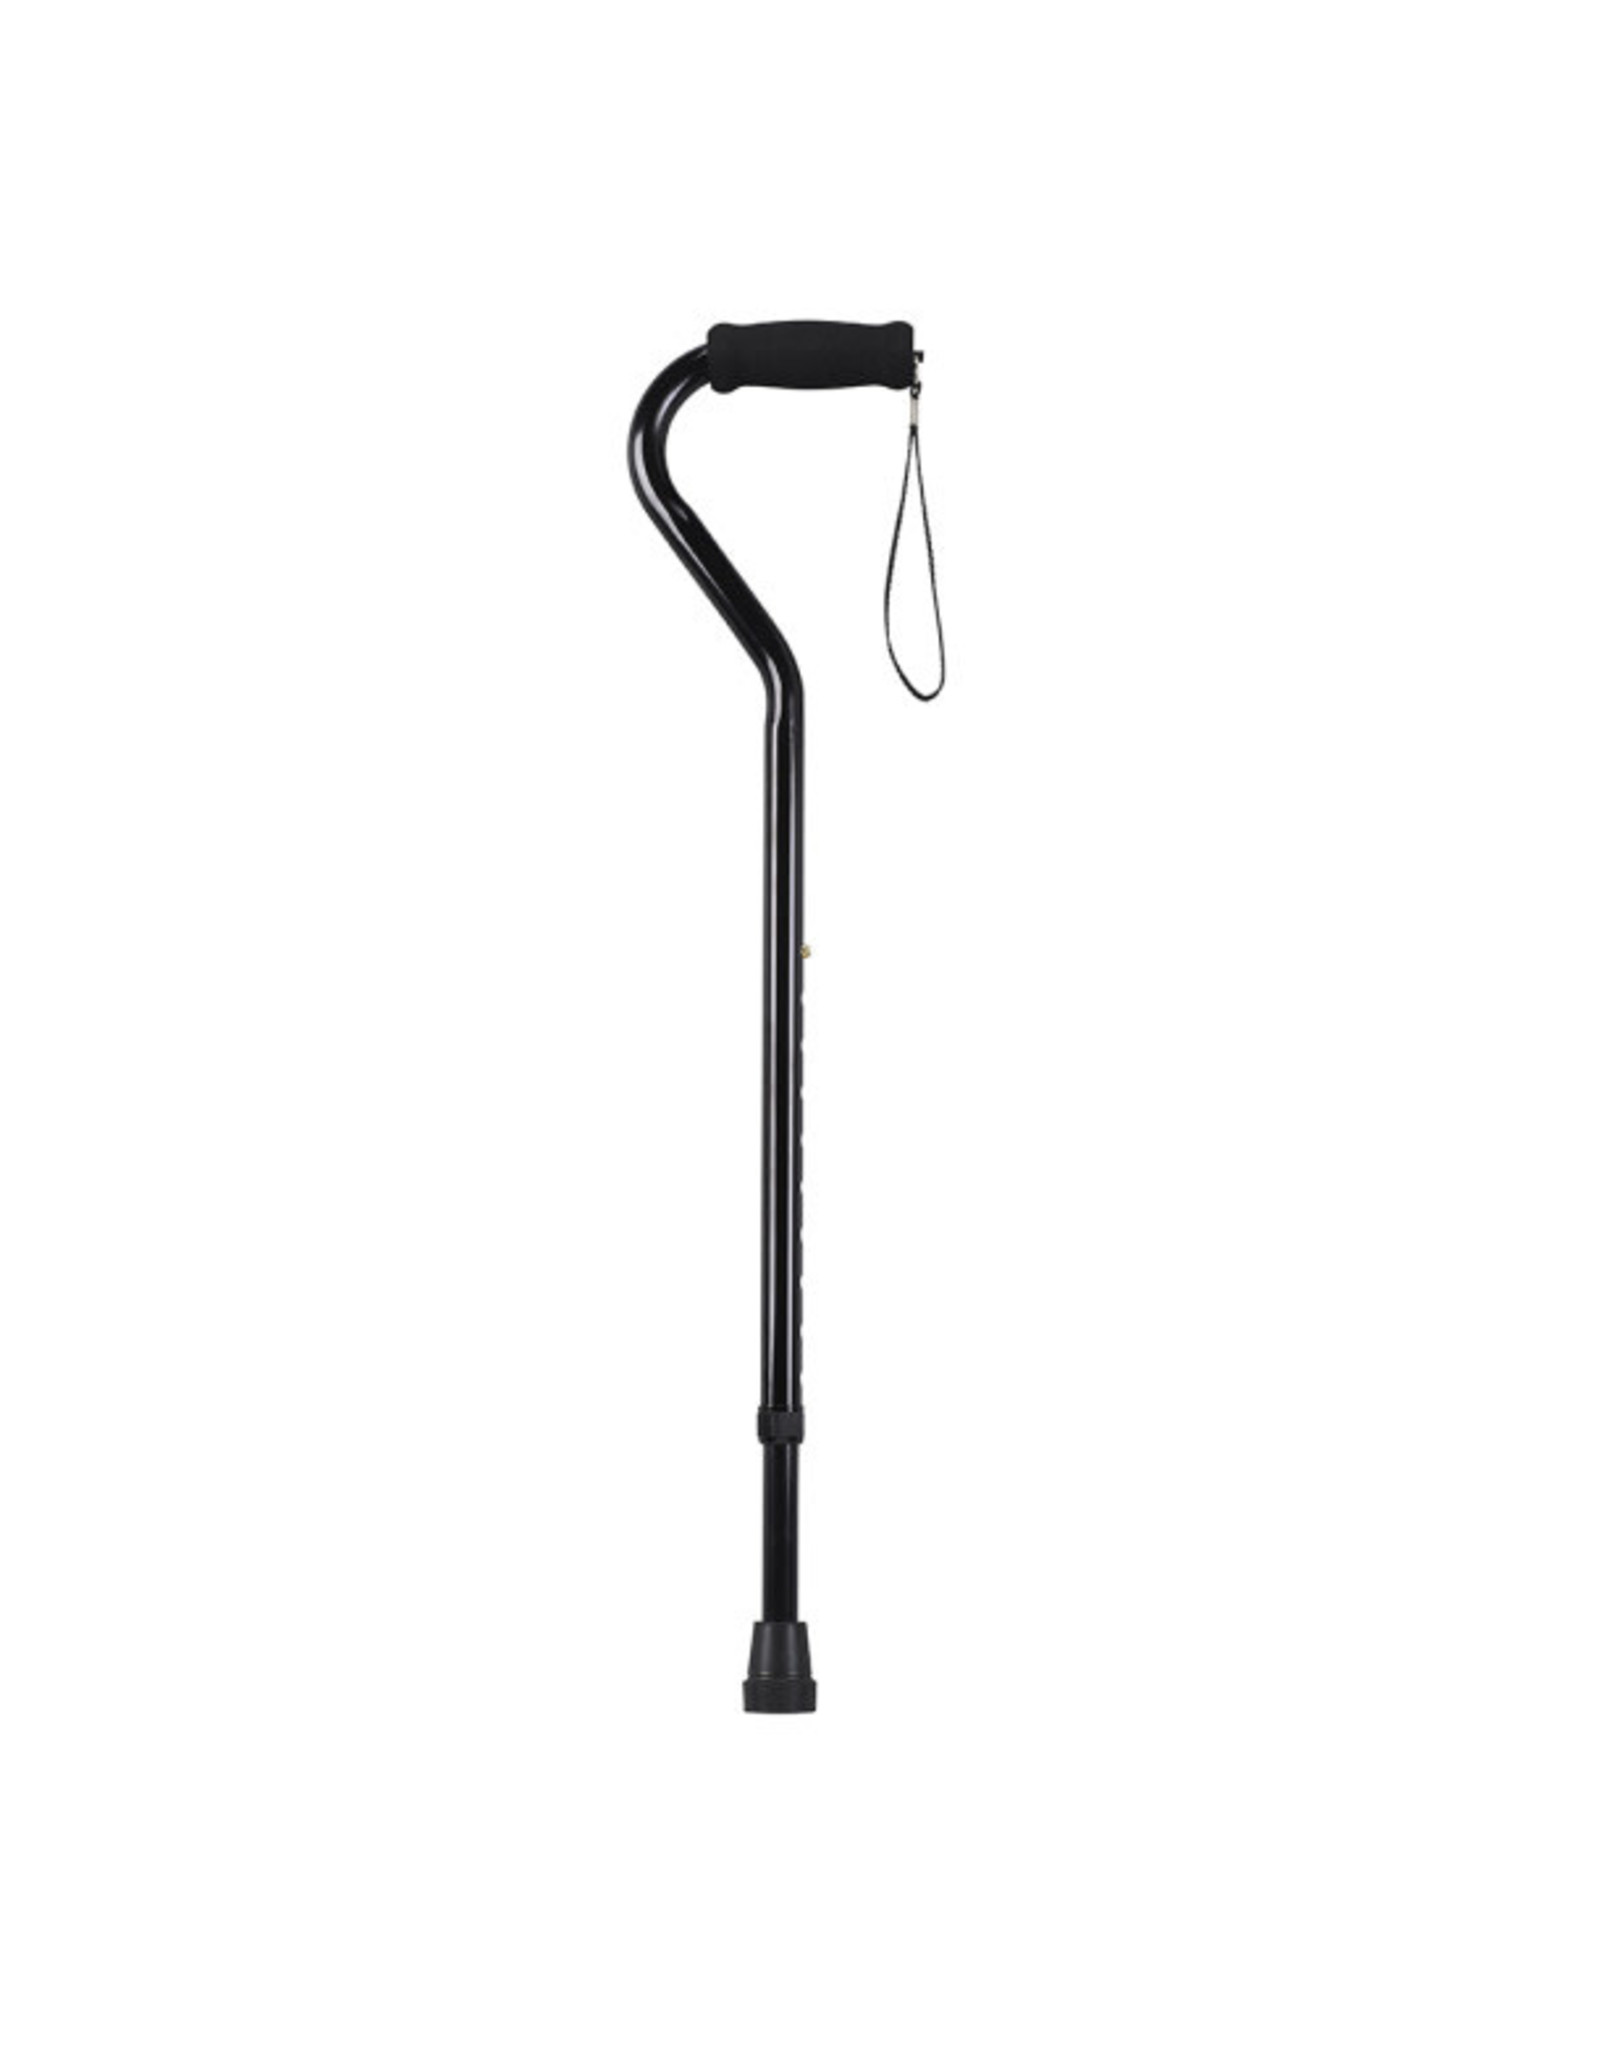 Drive Offset Cane - Black with Soft Foam Handle